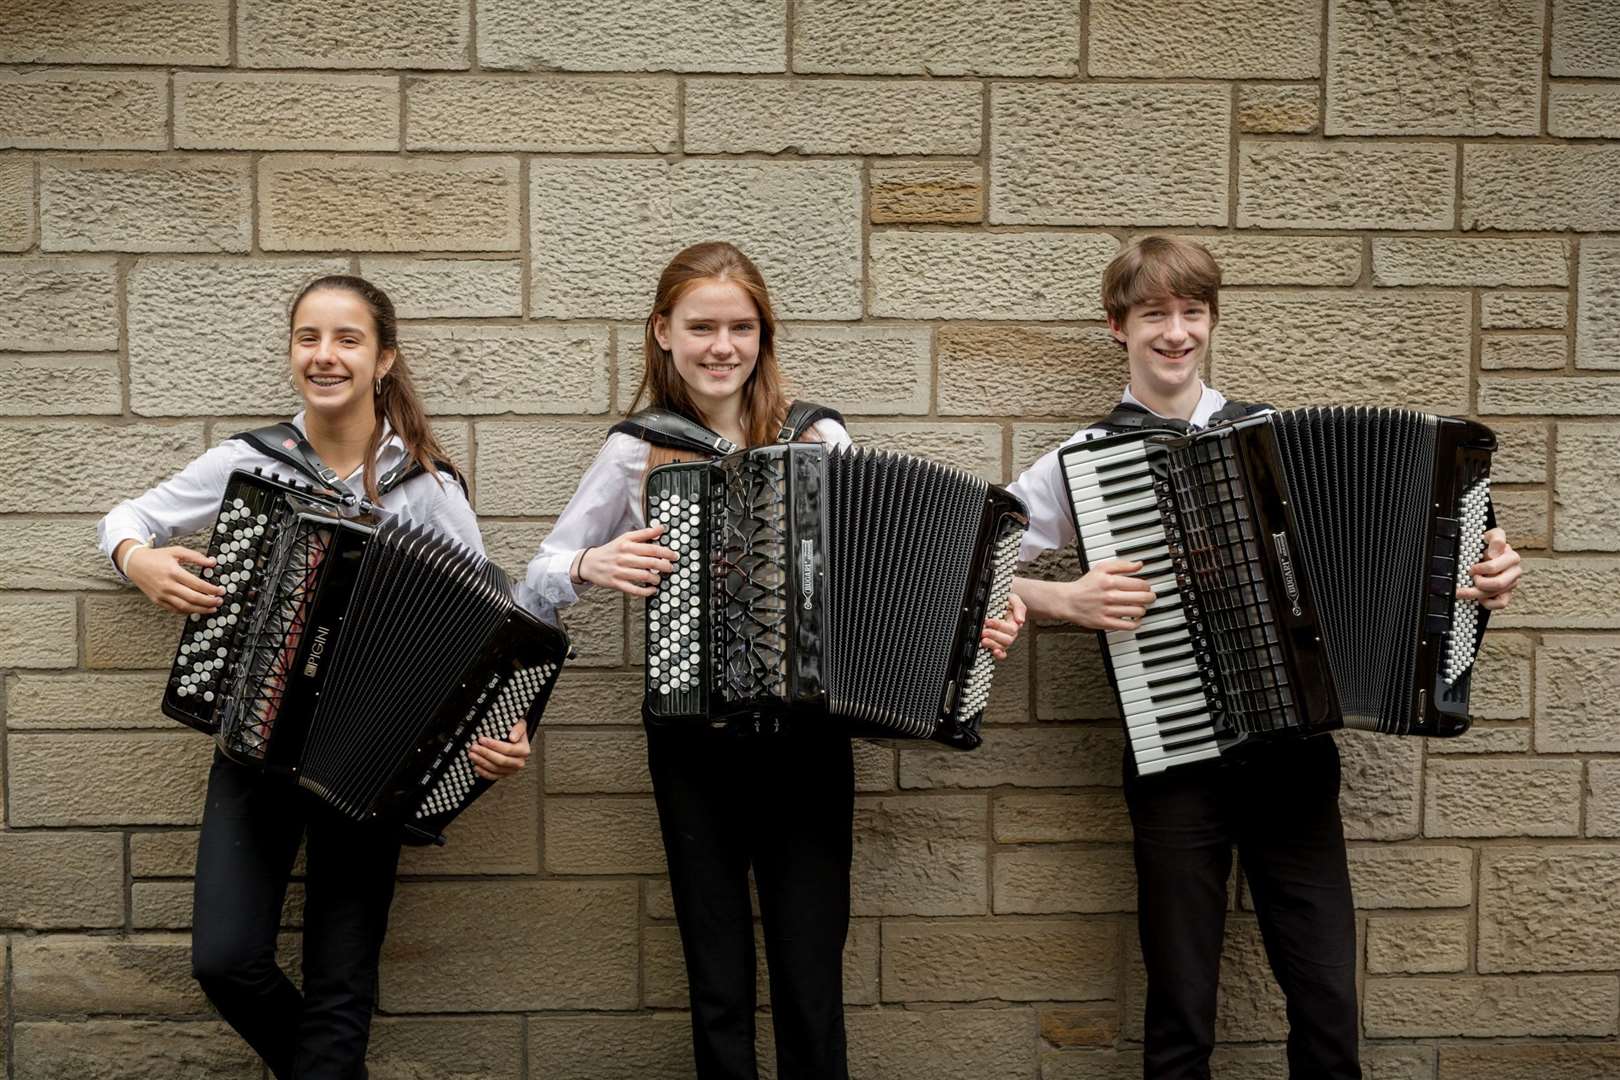 Funding will help young musicians across Aberdeenshire to access boarding places at St Mary’s Music School, Scotland’s national music school in Edinburgh.